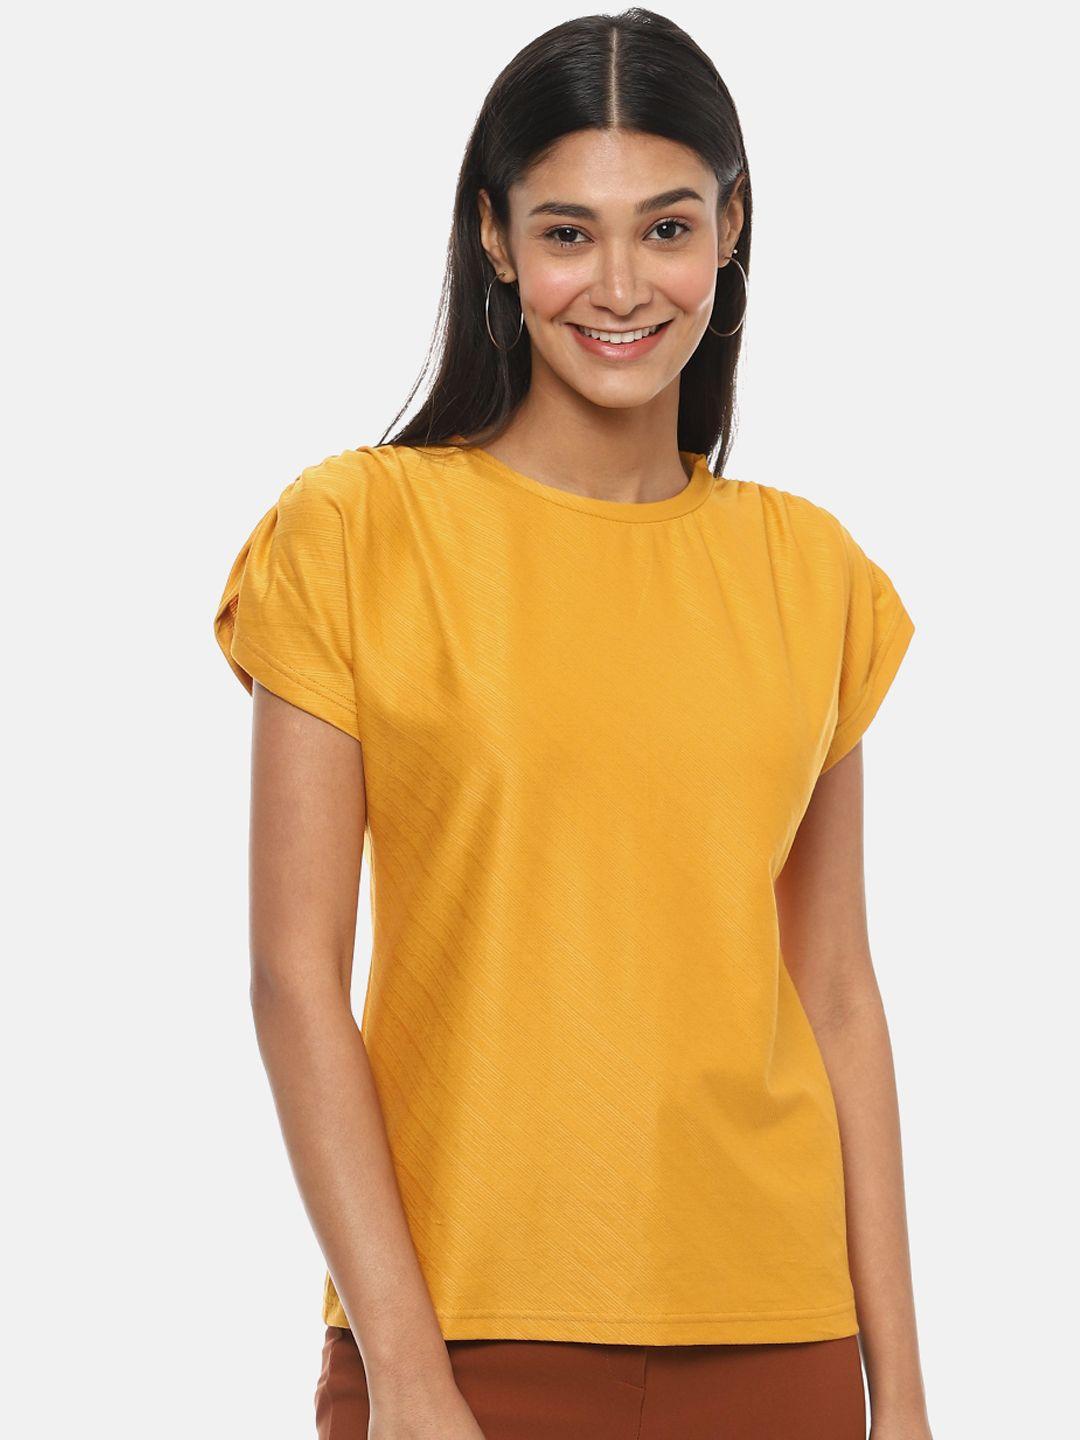 campus-sutra-mustard-yellow-solid-round-neck-pure-cotton-top